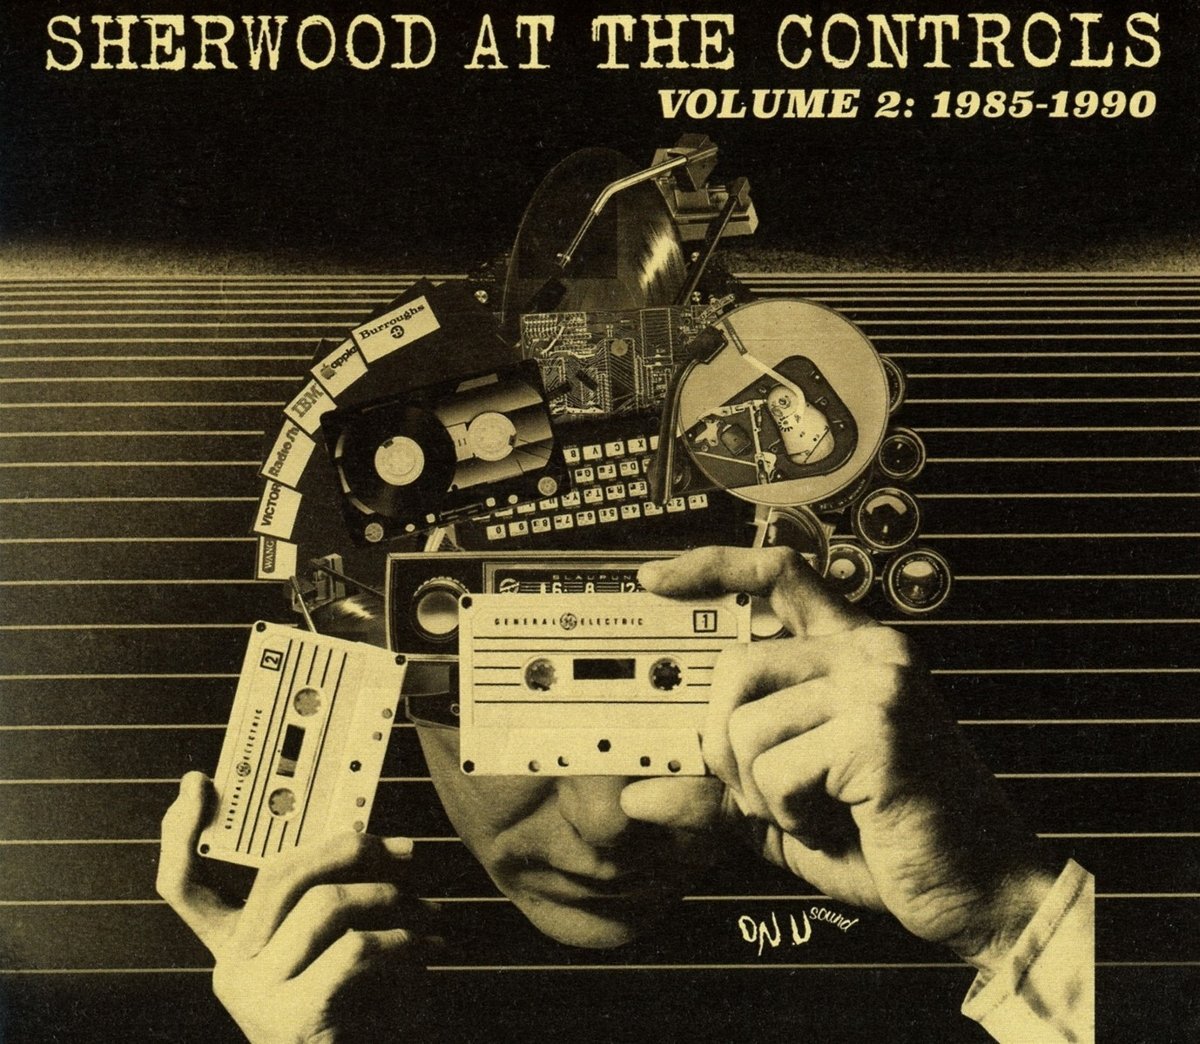 Various Artists - Sherwood At The Controls Volume 2: 1985-1990 (On-U Sound)